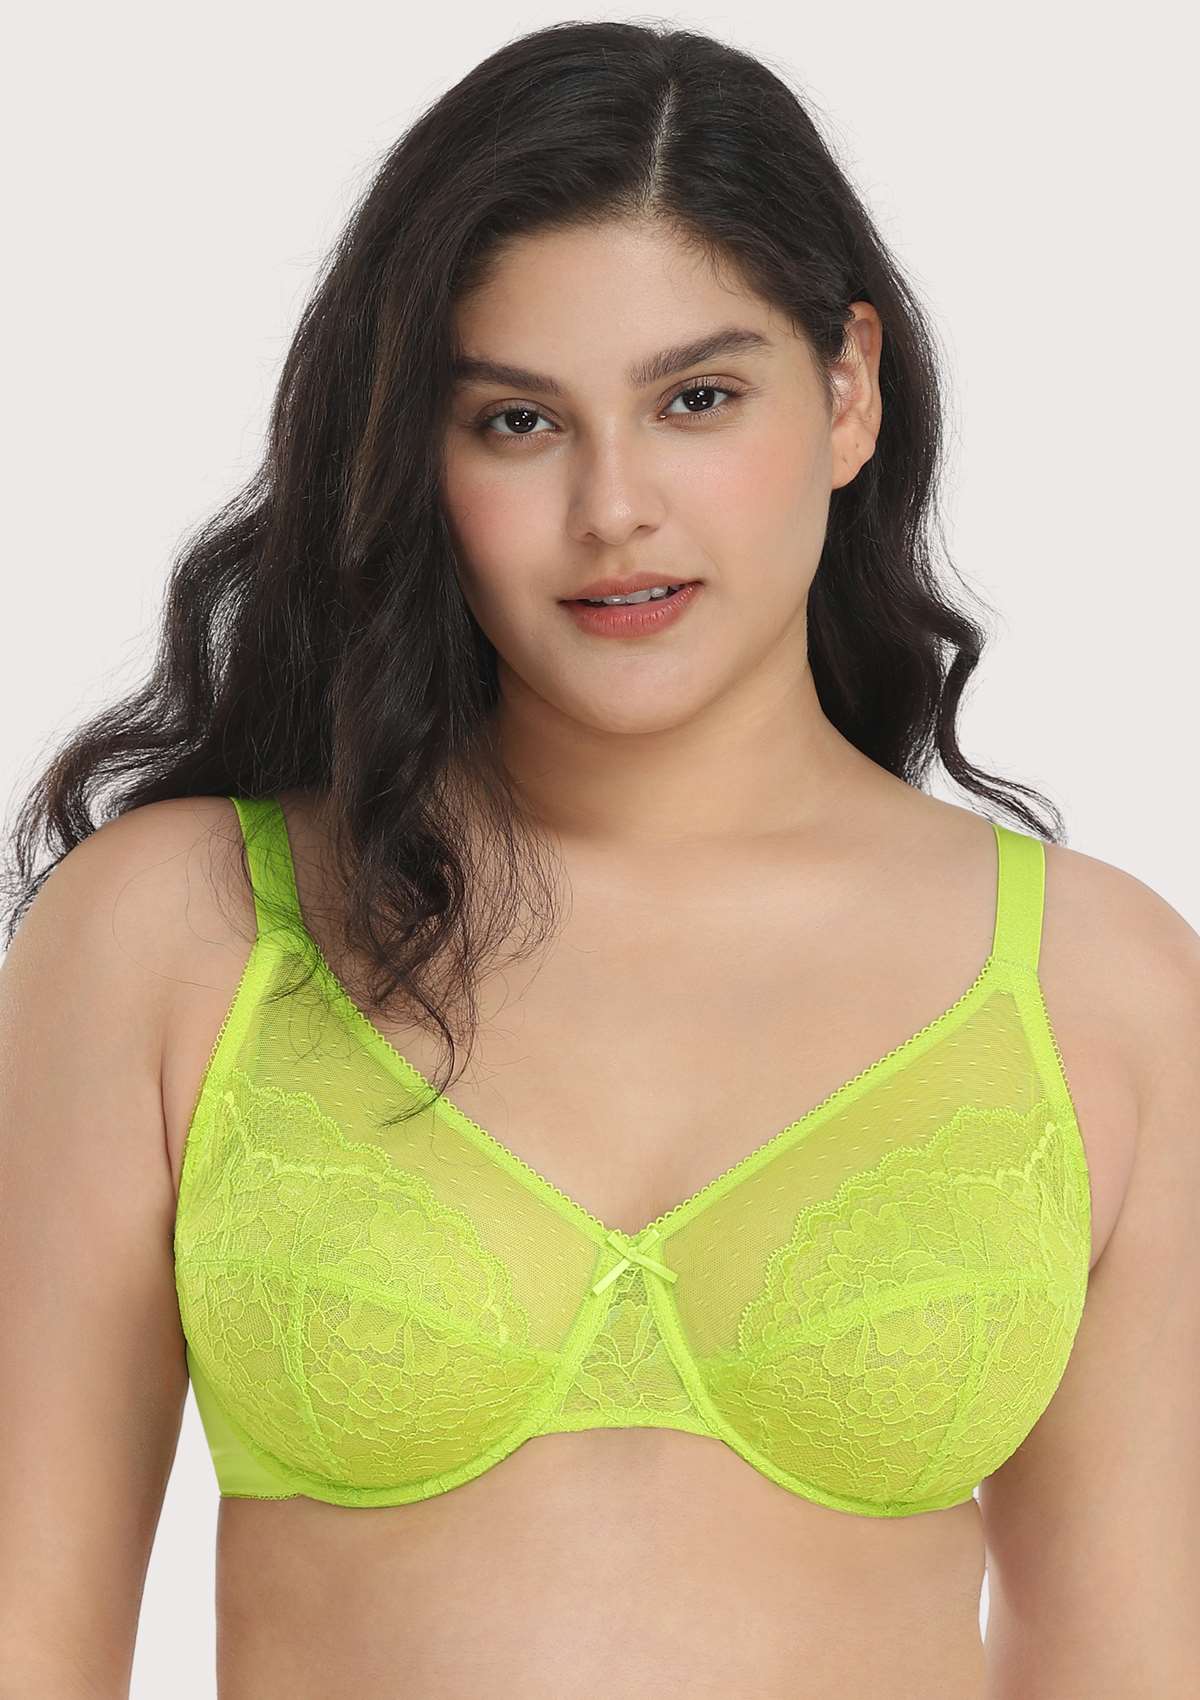 HSIA Enchante Full Cup Minimizing Bra: Supportive Unlined Lace Bra - Lime Green / 42 / DD/E